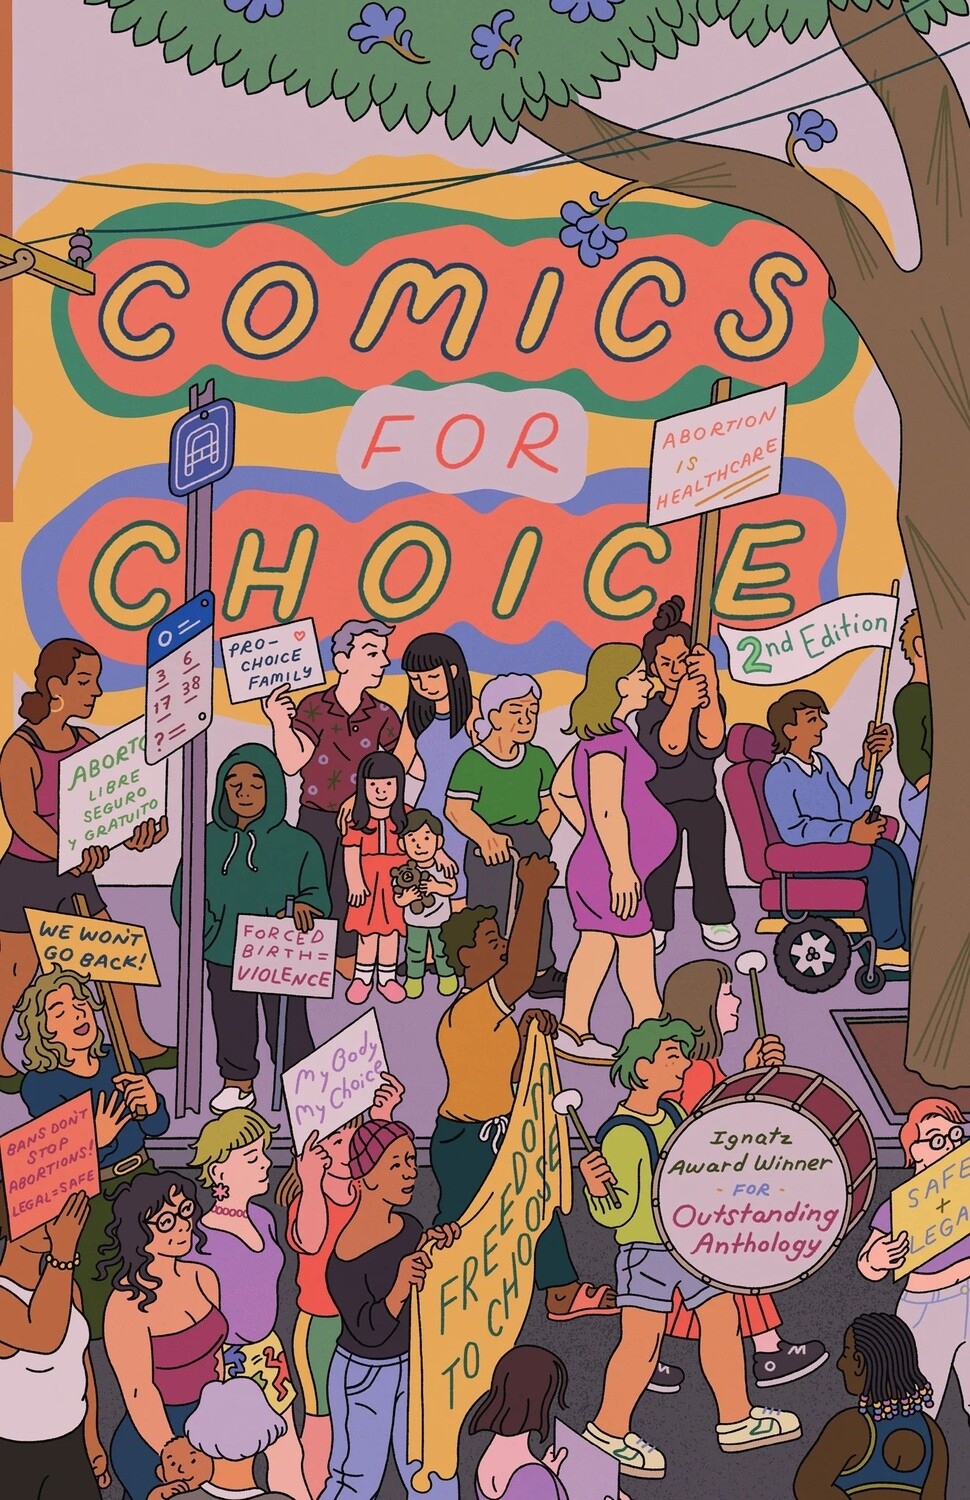 COMICS FOR CHOICE: Illustrated Abortion Stories, History and Politics